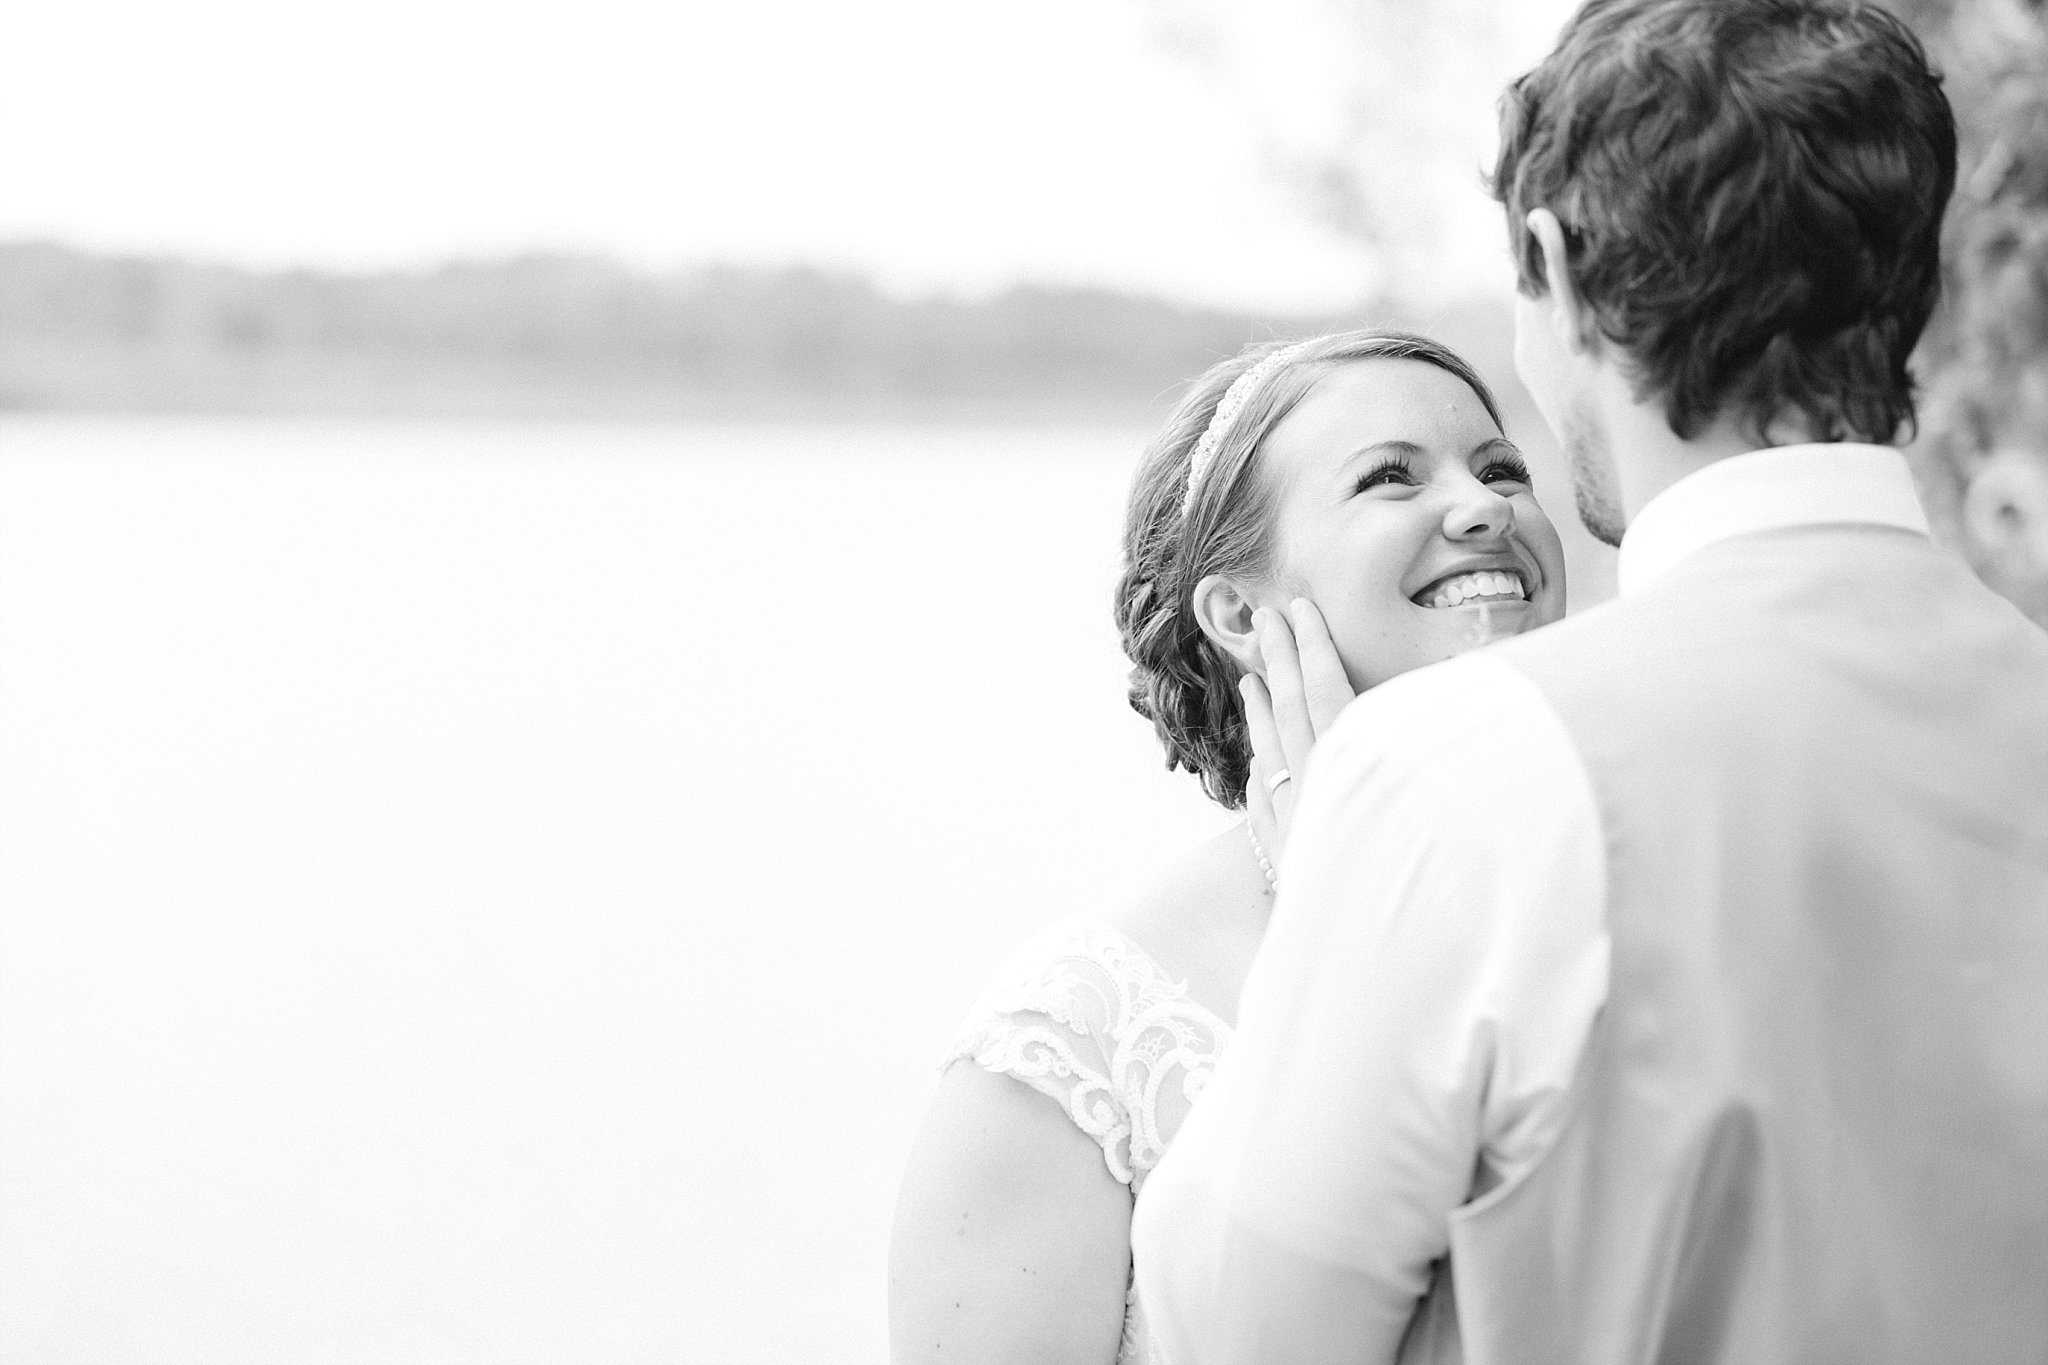 www.james-stokes.com | James Stokes Photography, LLC - Beautiful bride and groom wedding photo by the lake - Wisconsin wedding photographer